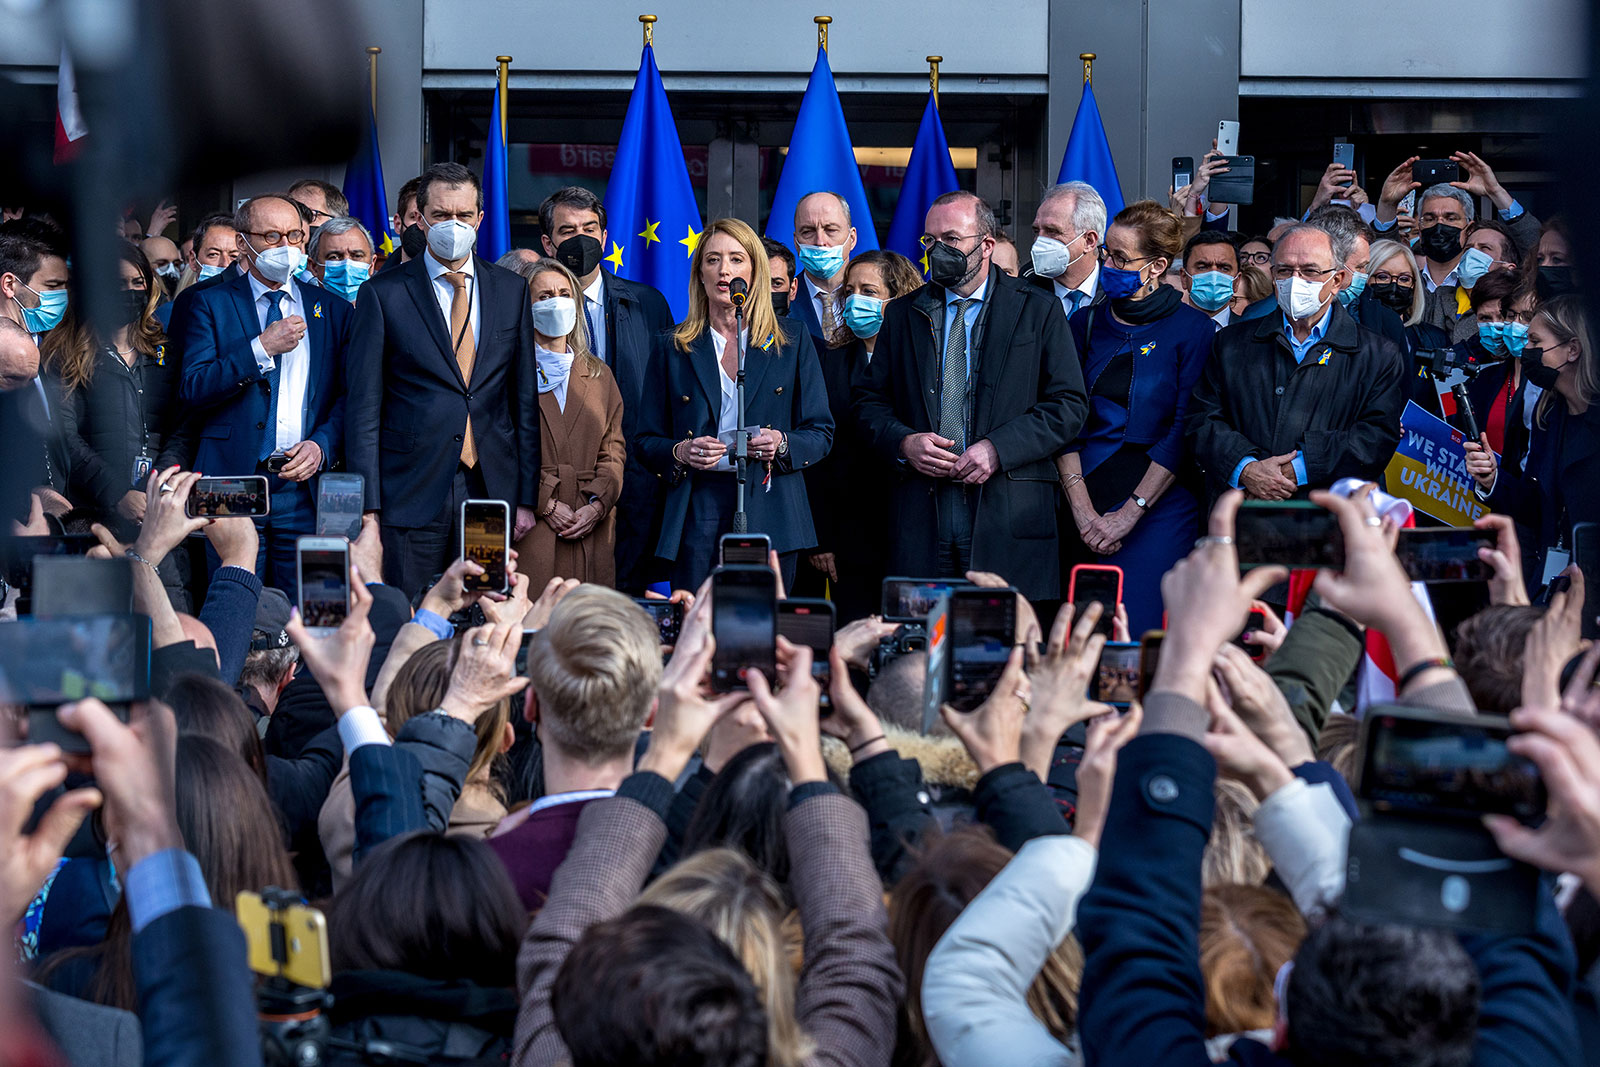 European Parliament President Roberta Metsola, center, speaks during a demonstration in front of the European Parliament in Brussels on March 1.